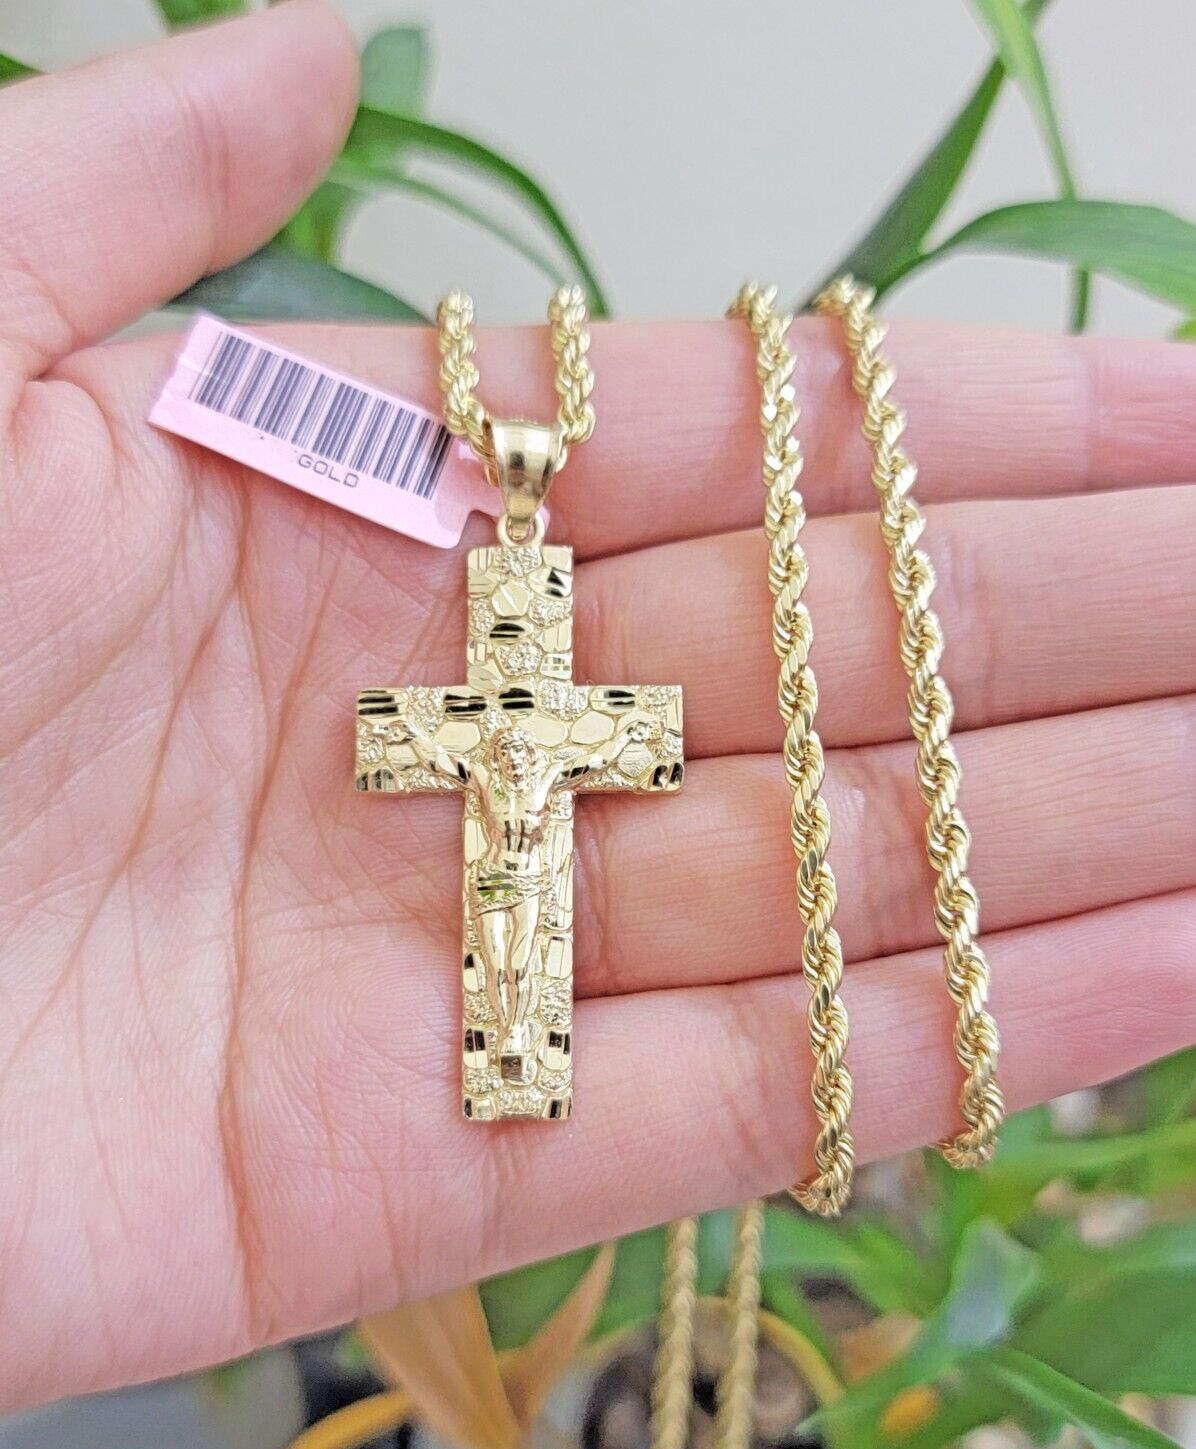 Chrome Hearts Necklace- Cross Necklace Rock Necklace 925 Sliver Jewelry -  Jewelry